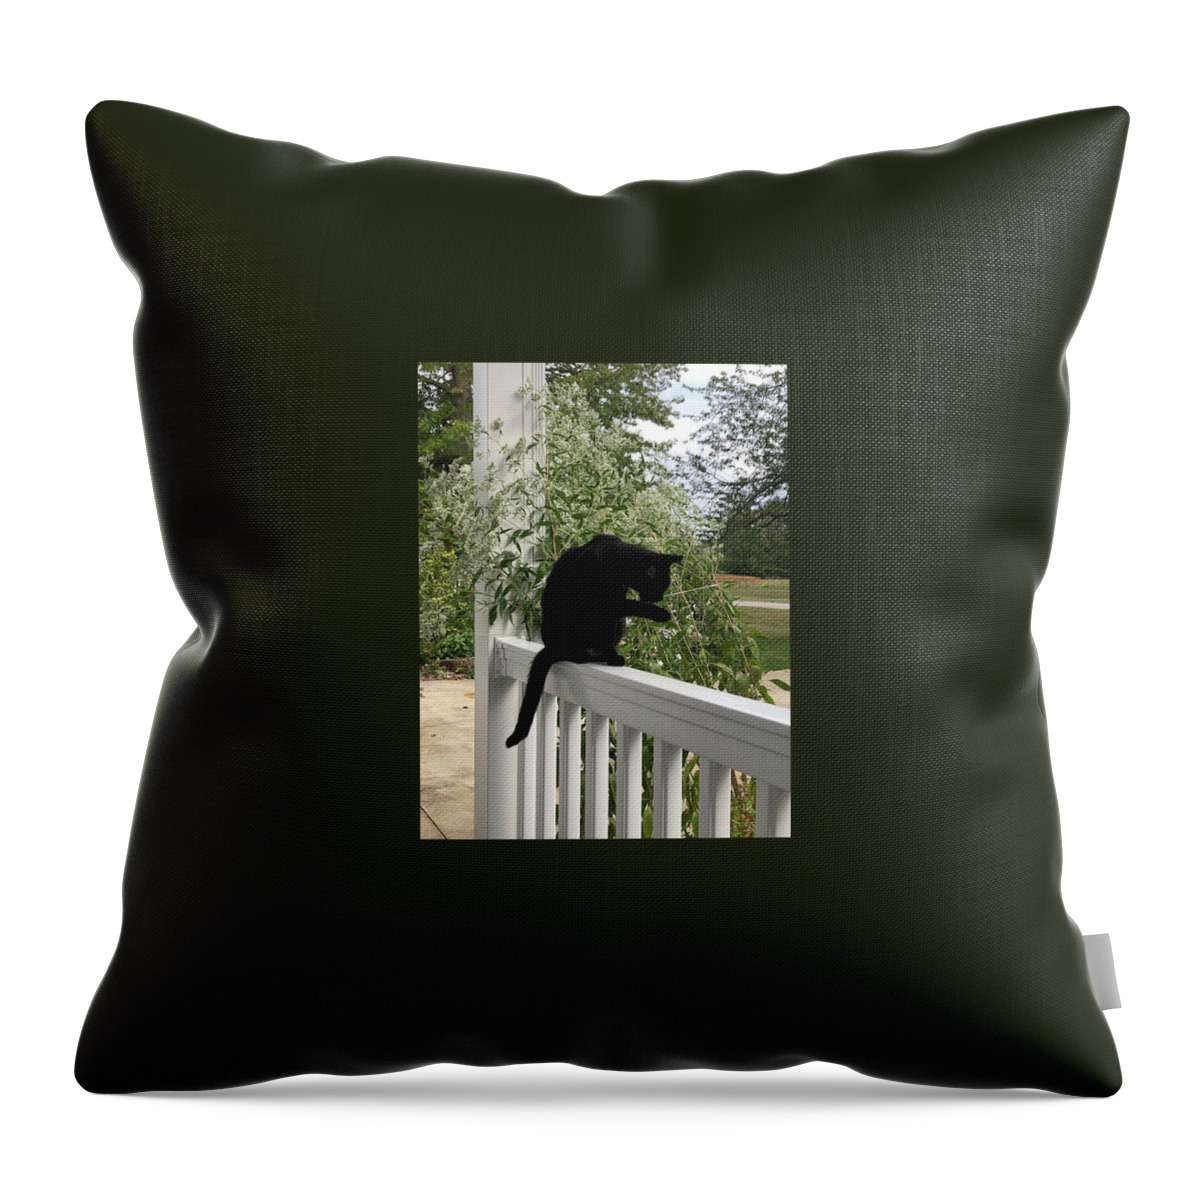 Black Cat Throw Pillow featuring the photograph Black Cat Bathing by Valerie Collins